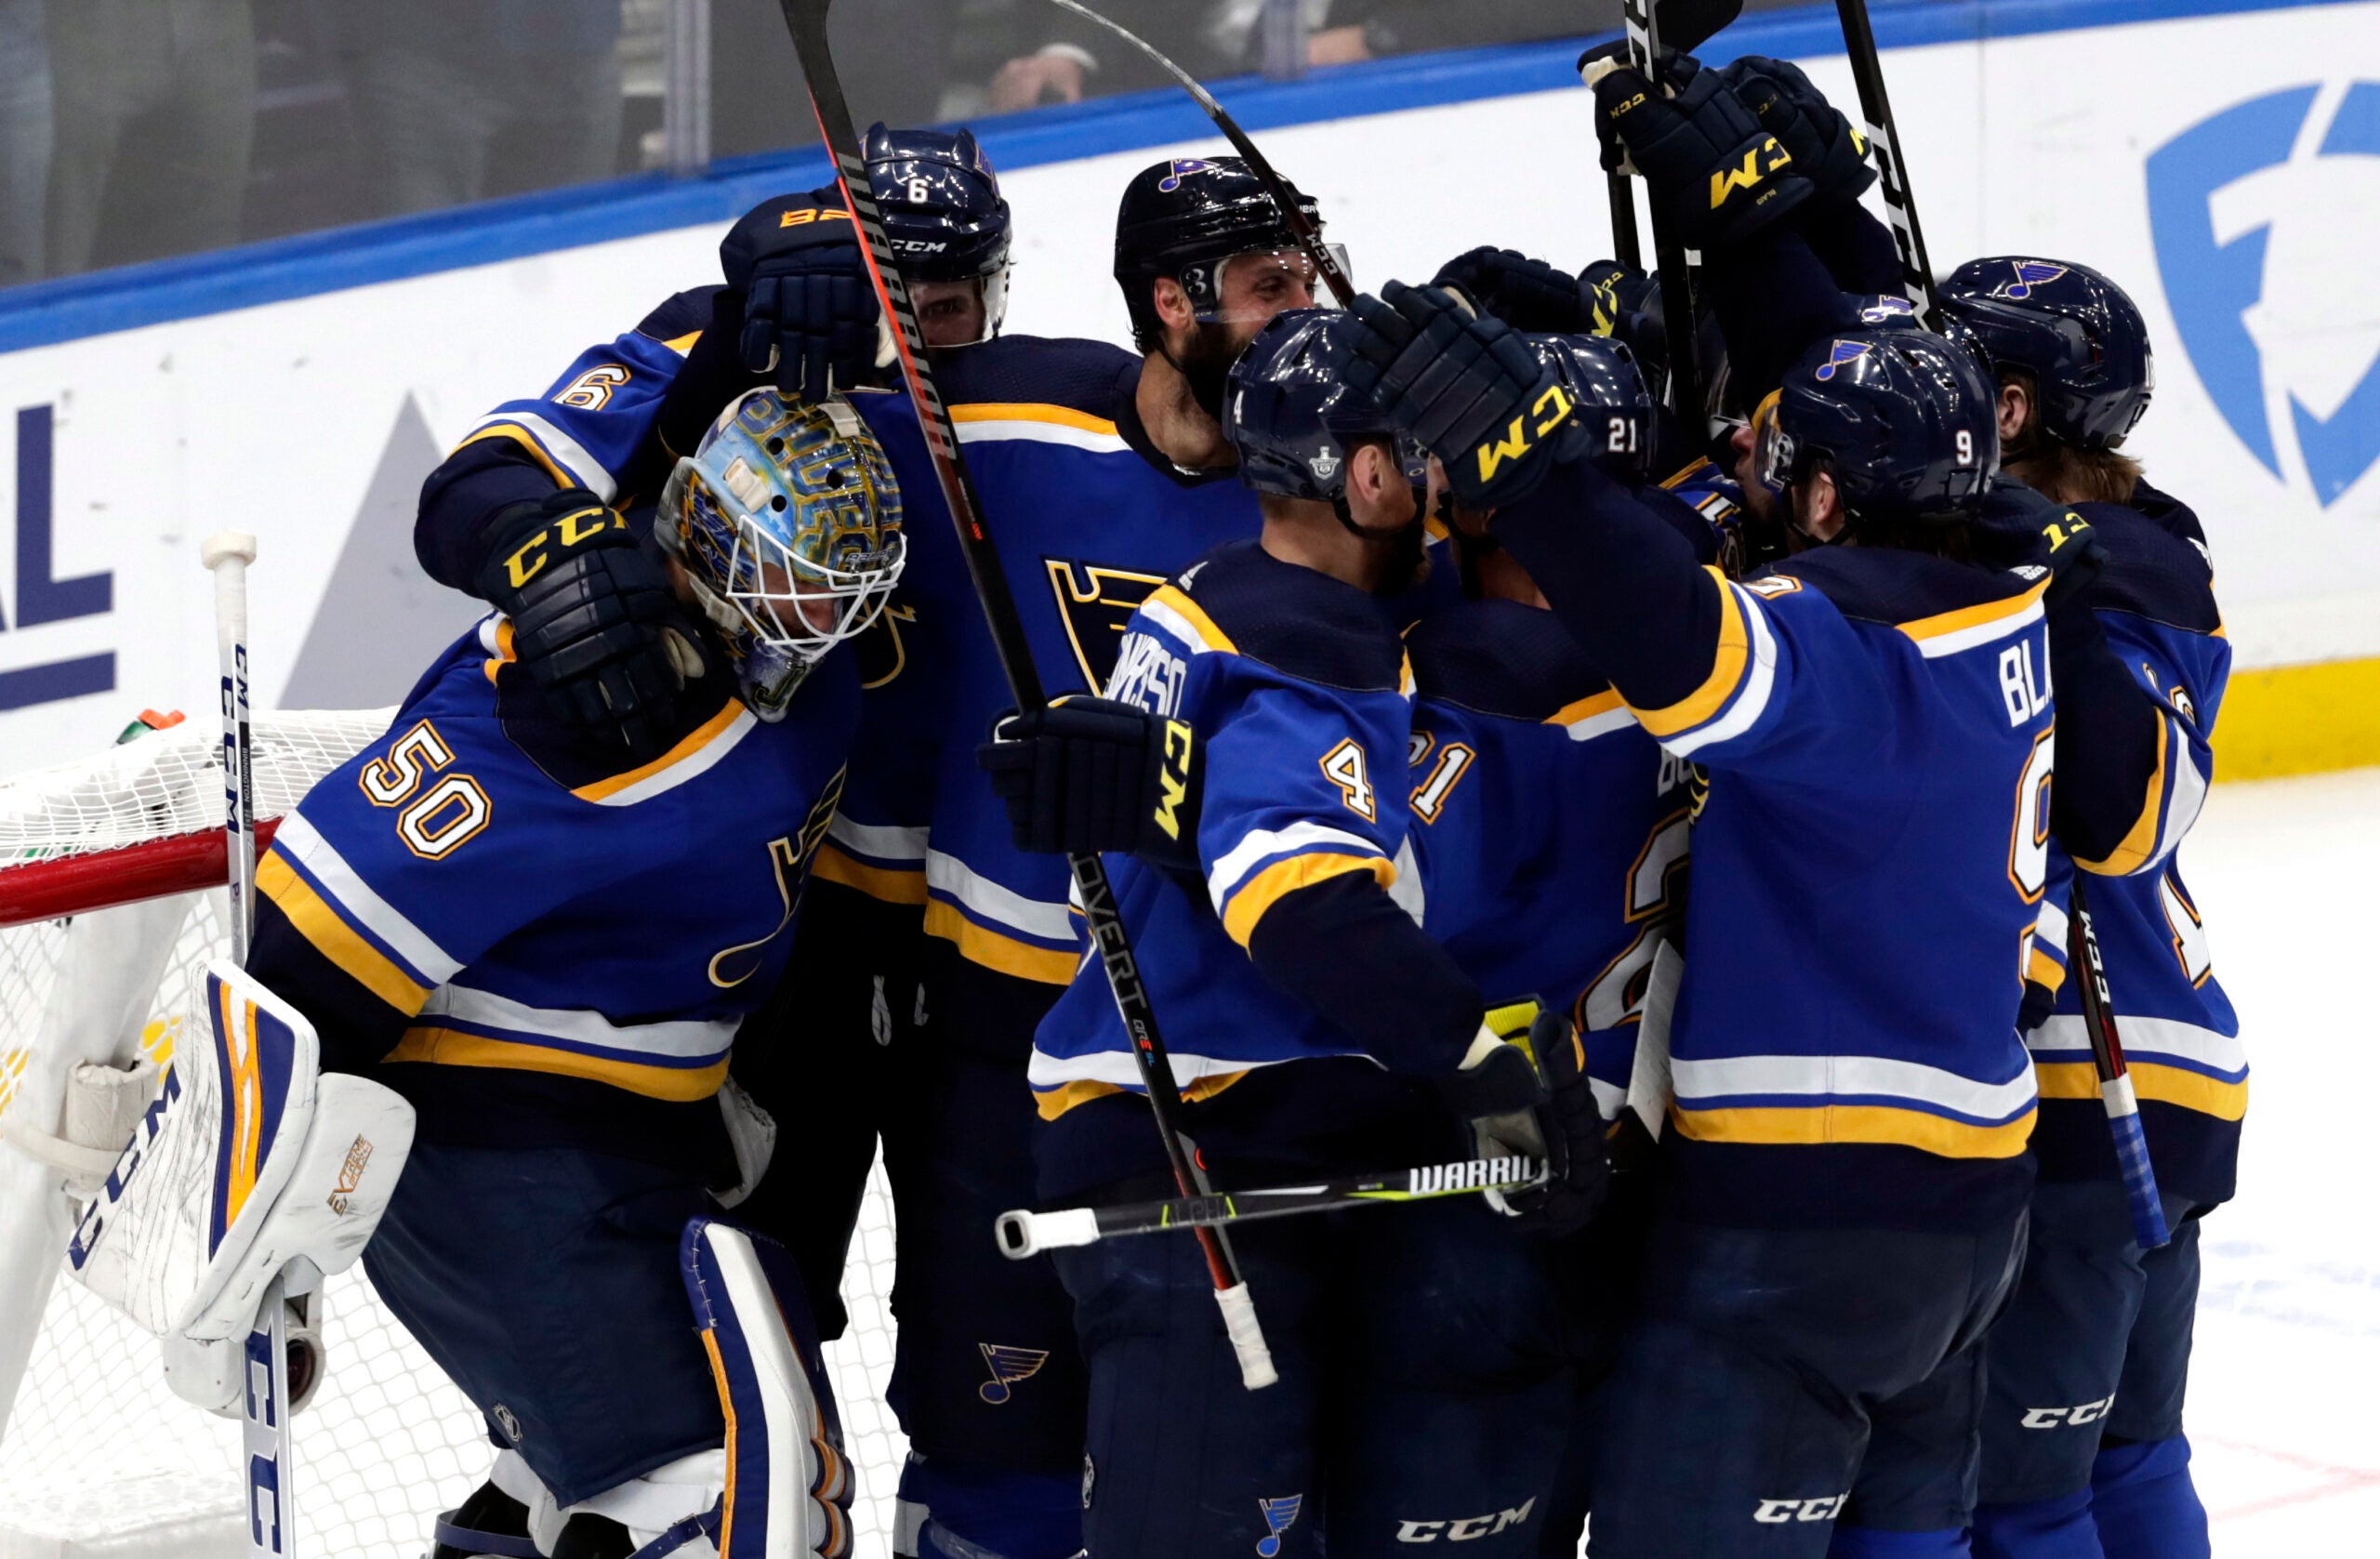 Stanley Cup 2019: Here's all the Blues merch you need to celebrate